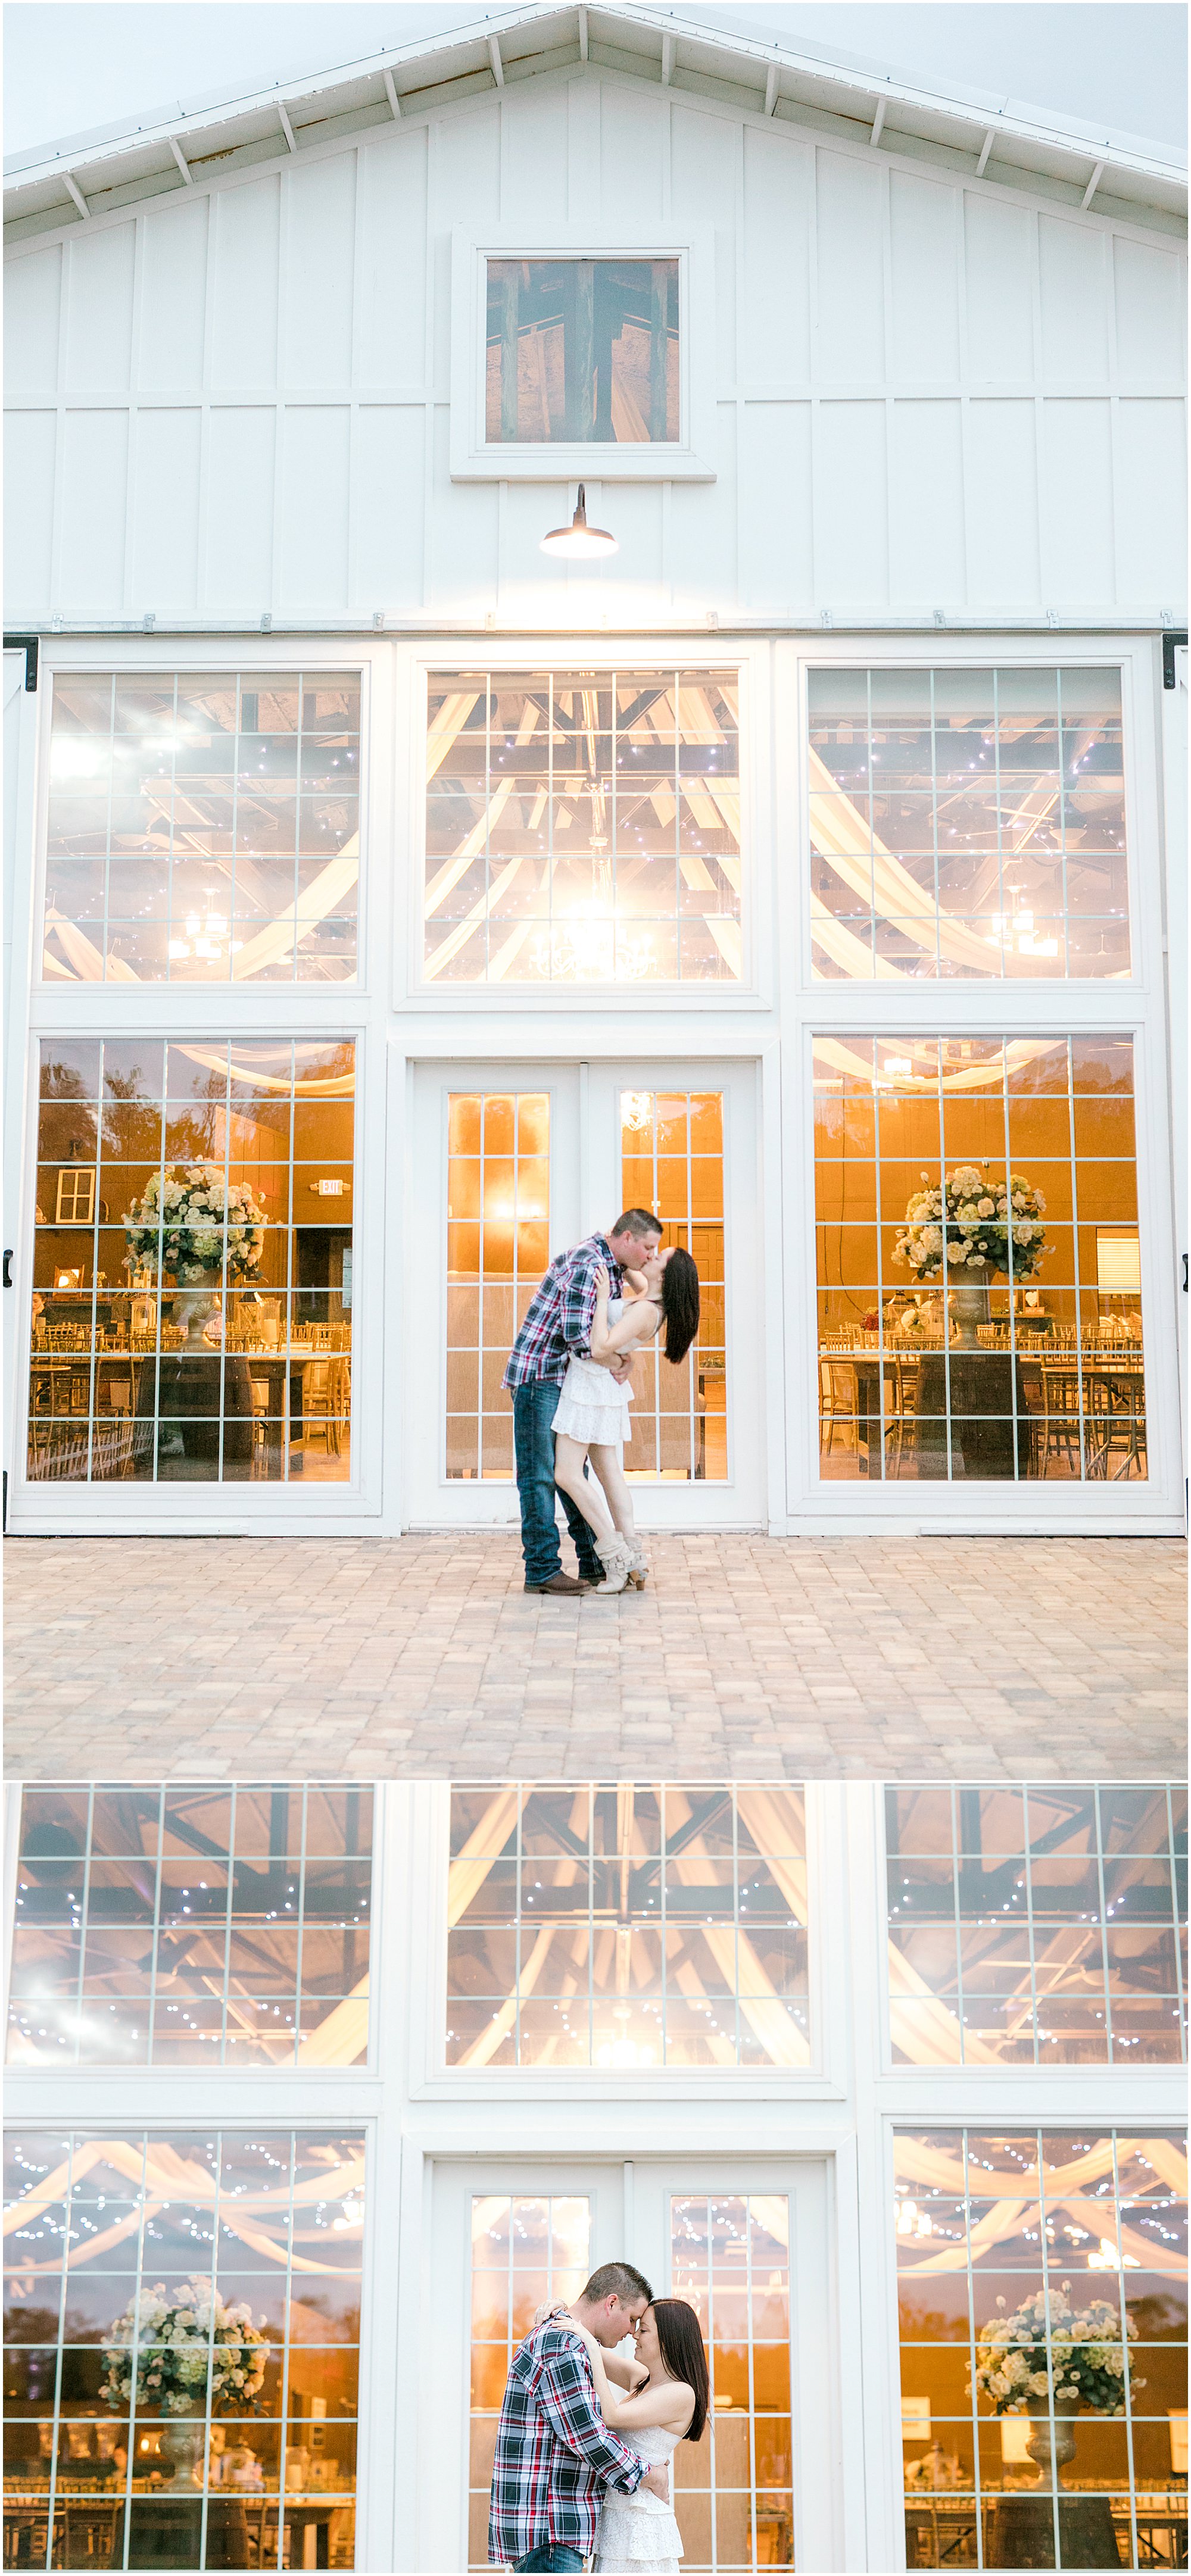 Couple kiss while standing in front of large glass windows on the side of the barn